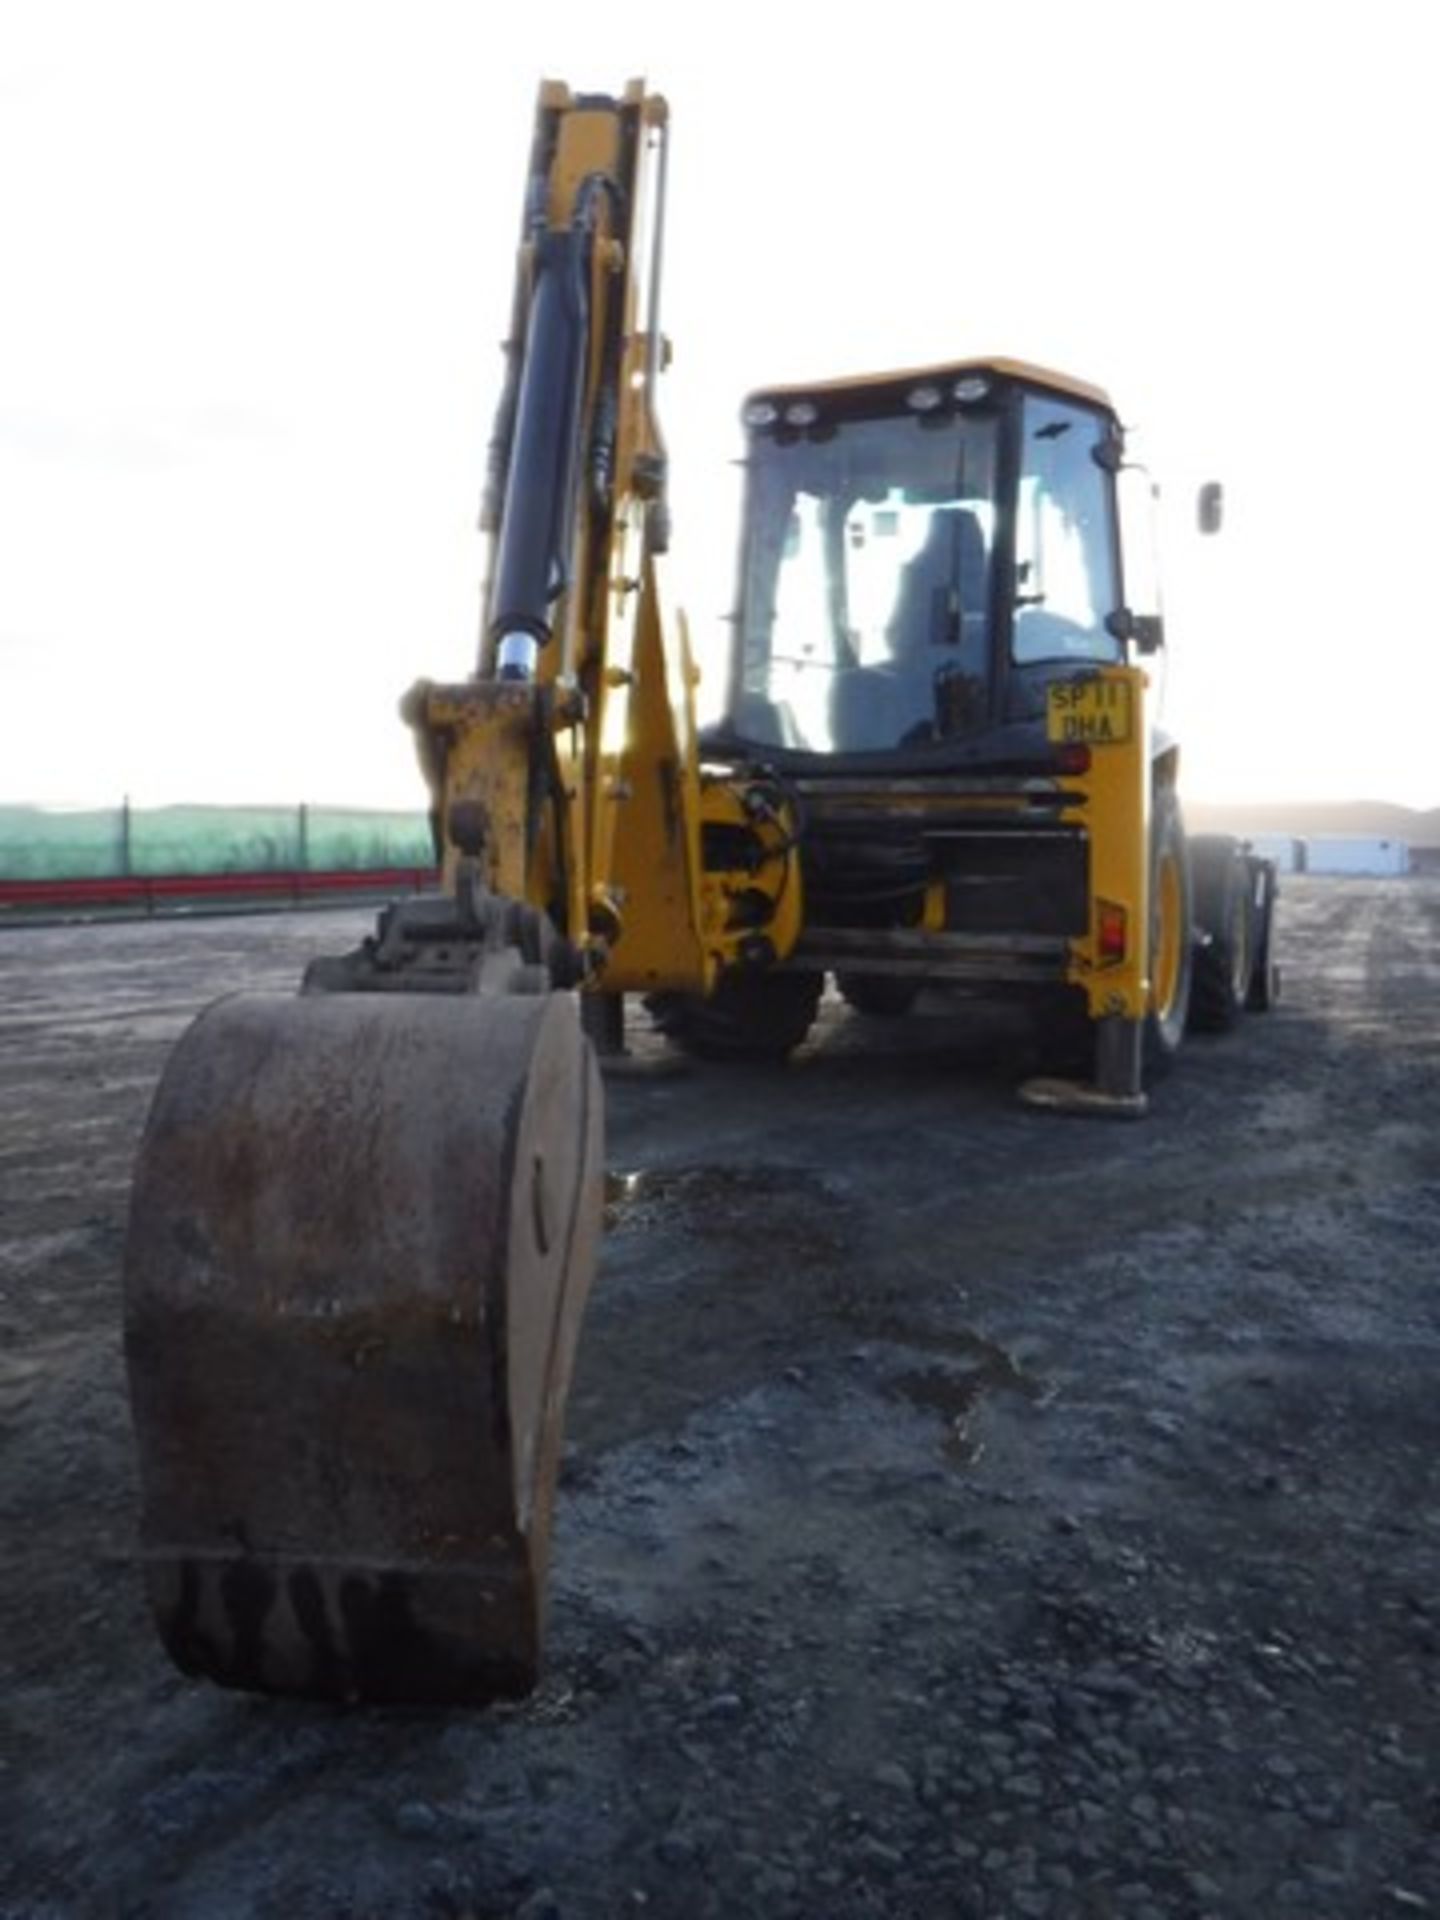 2011 JCB 3CX ECO 4 in 1 bucket S/N JCB3CX4TP02008318 - 6175 hrs (not verified) - Image 5 of 14